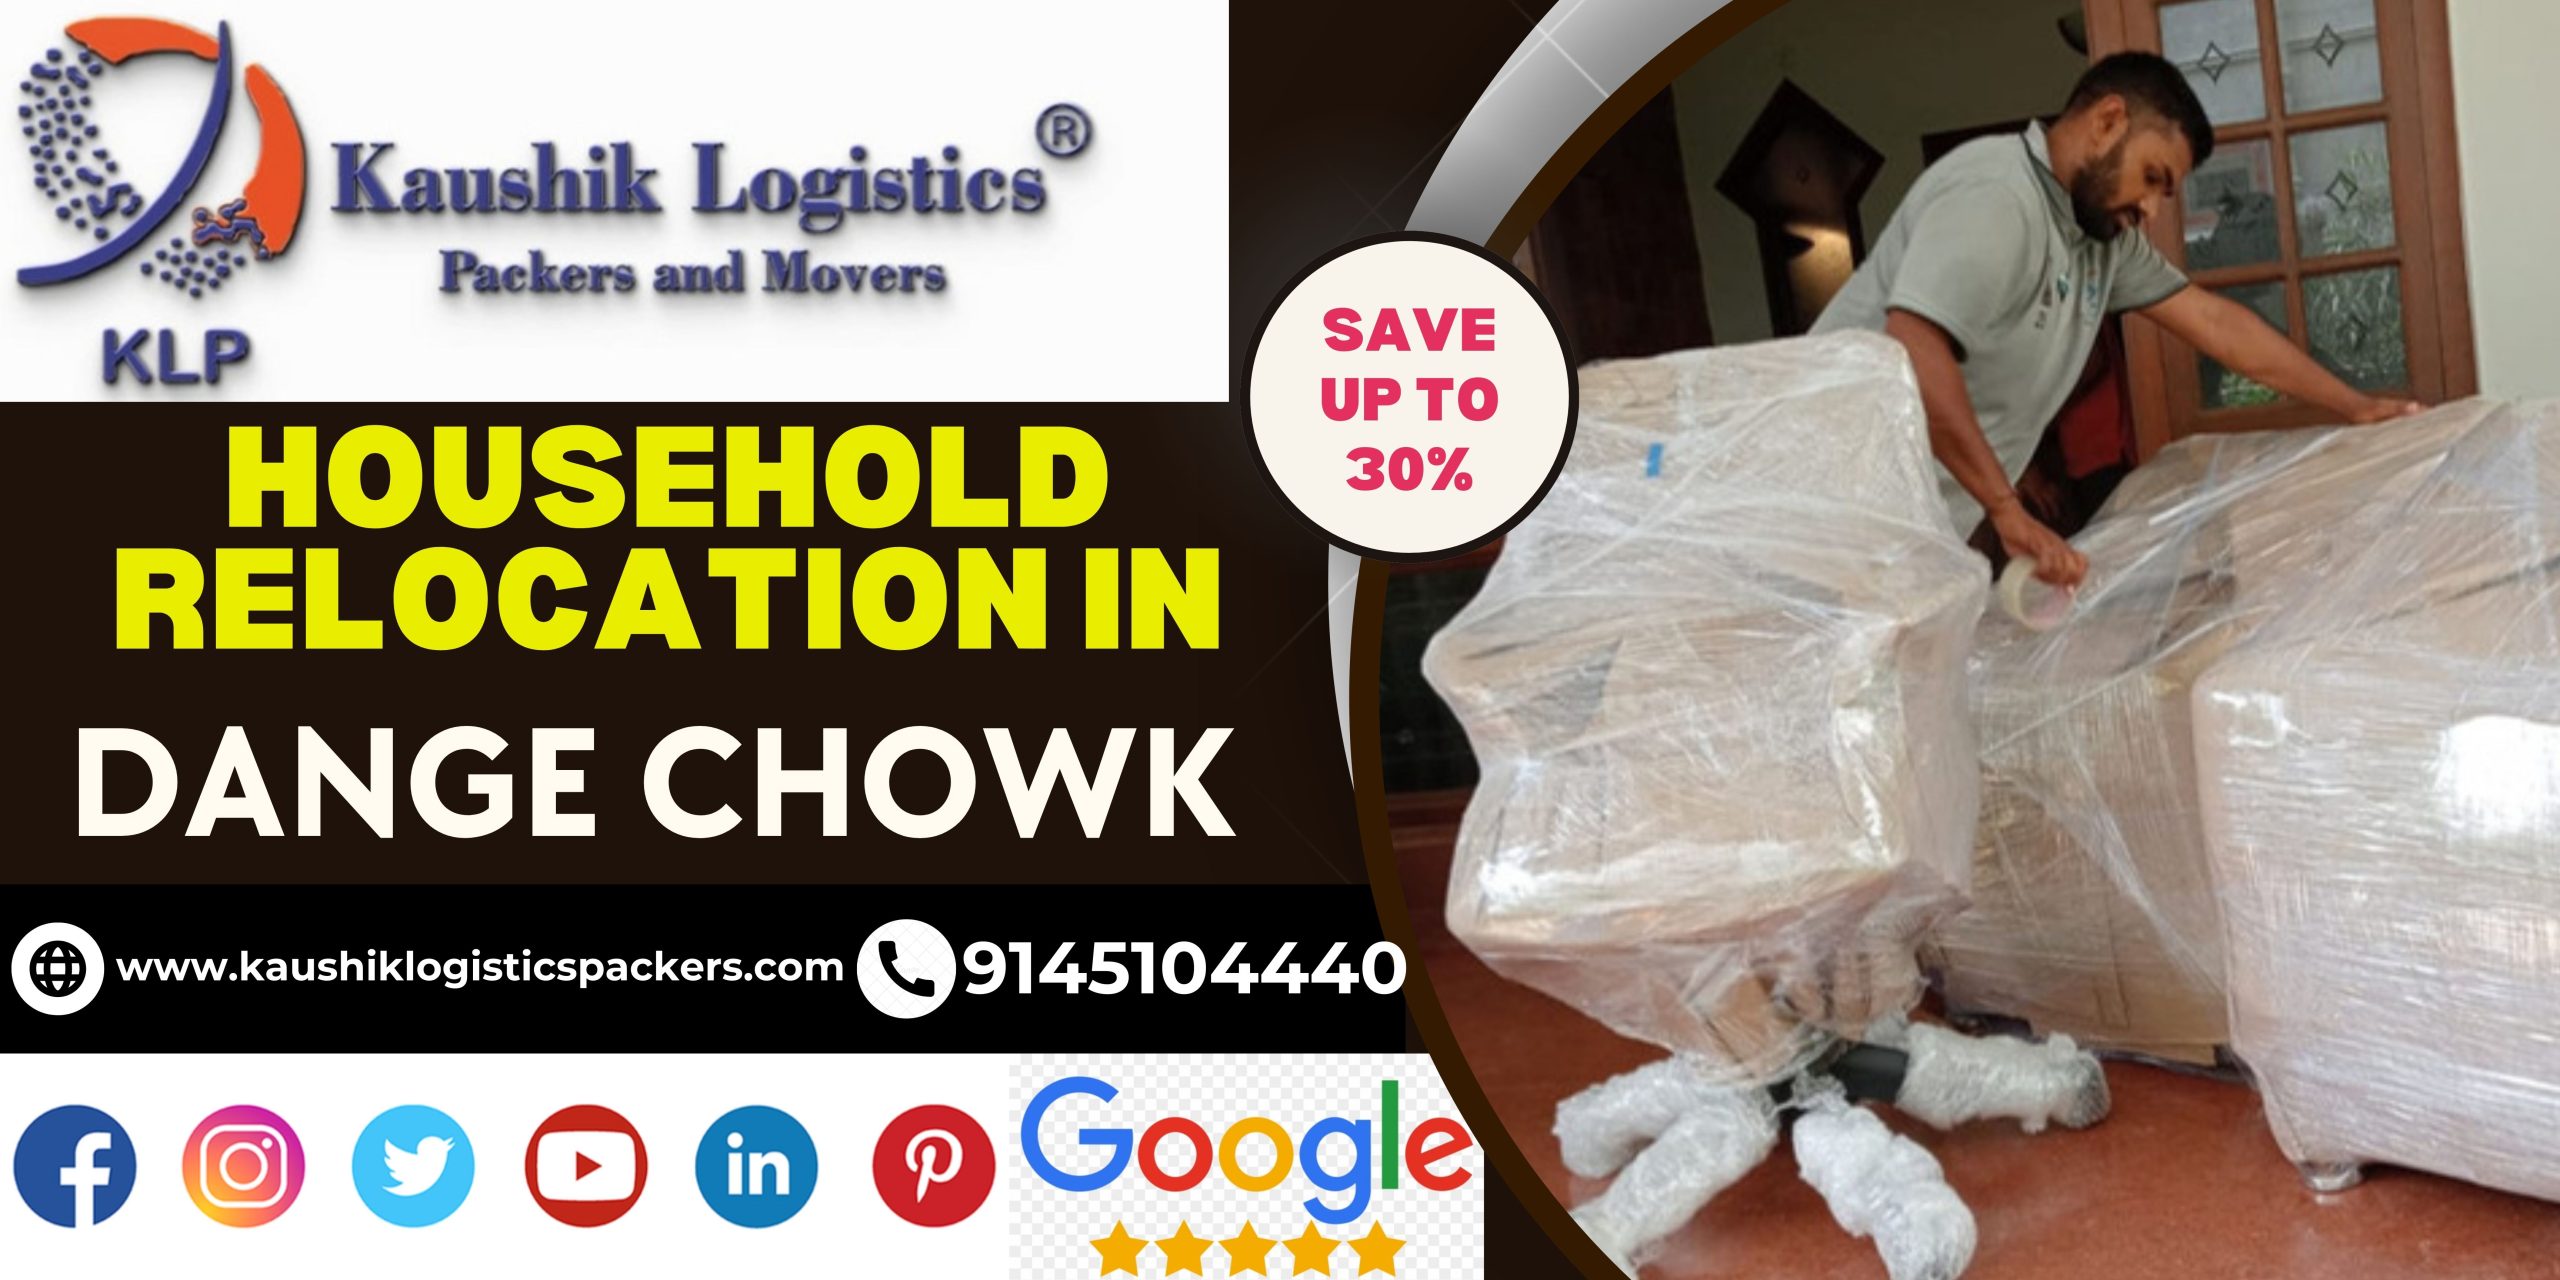 Packers and Movers In Dange Chowk